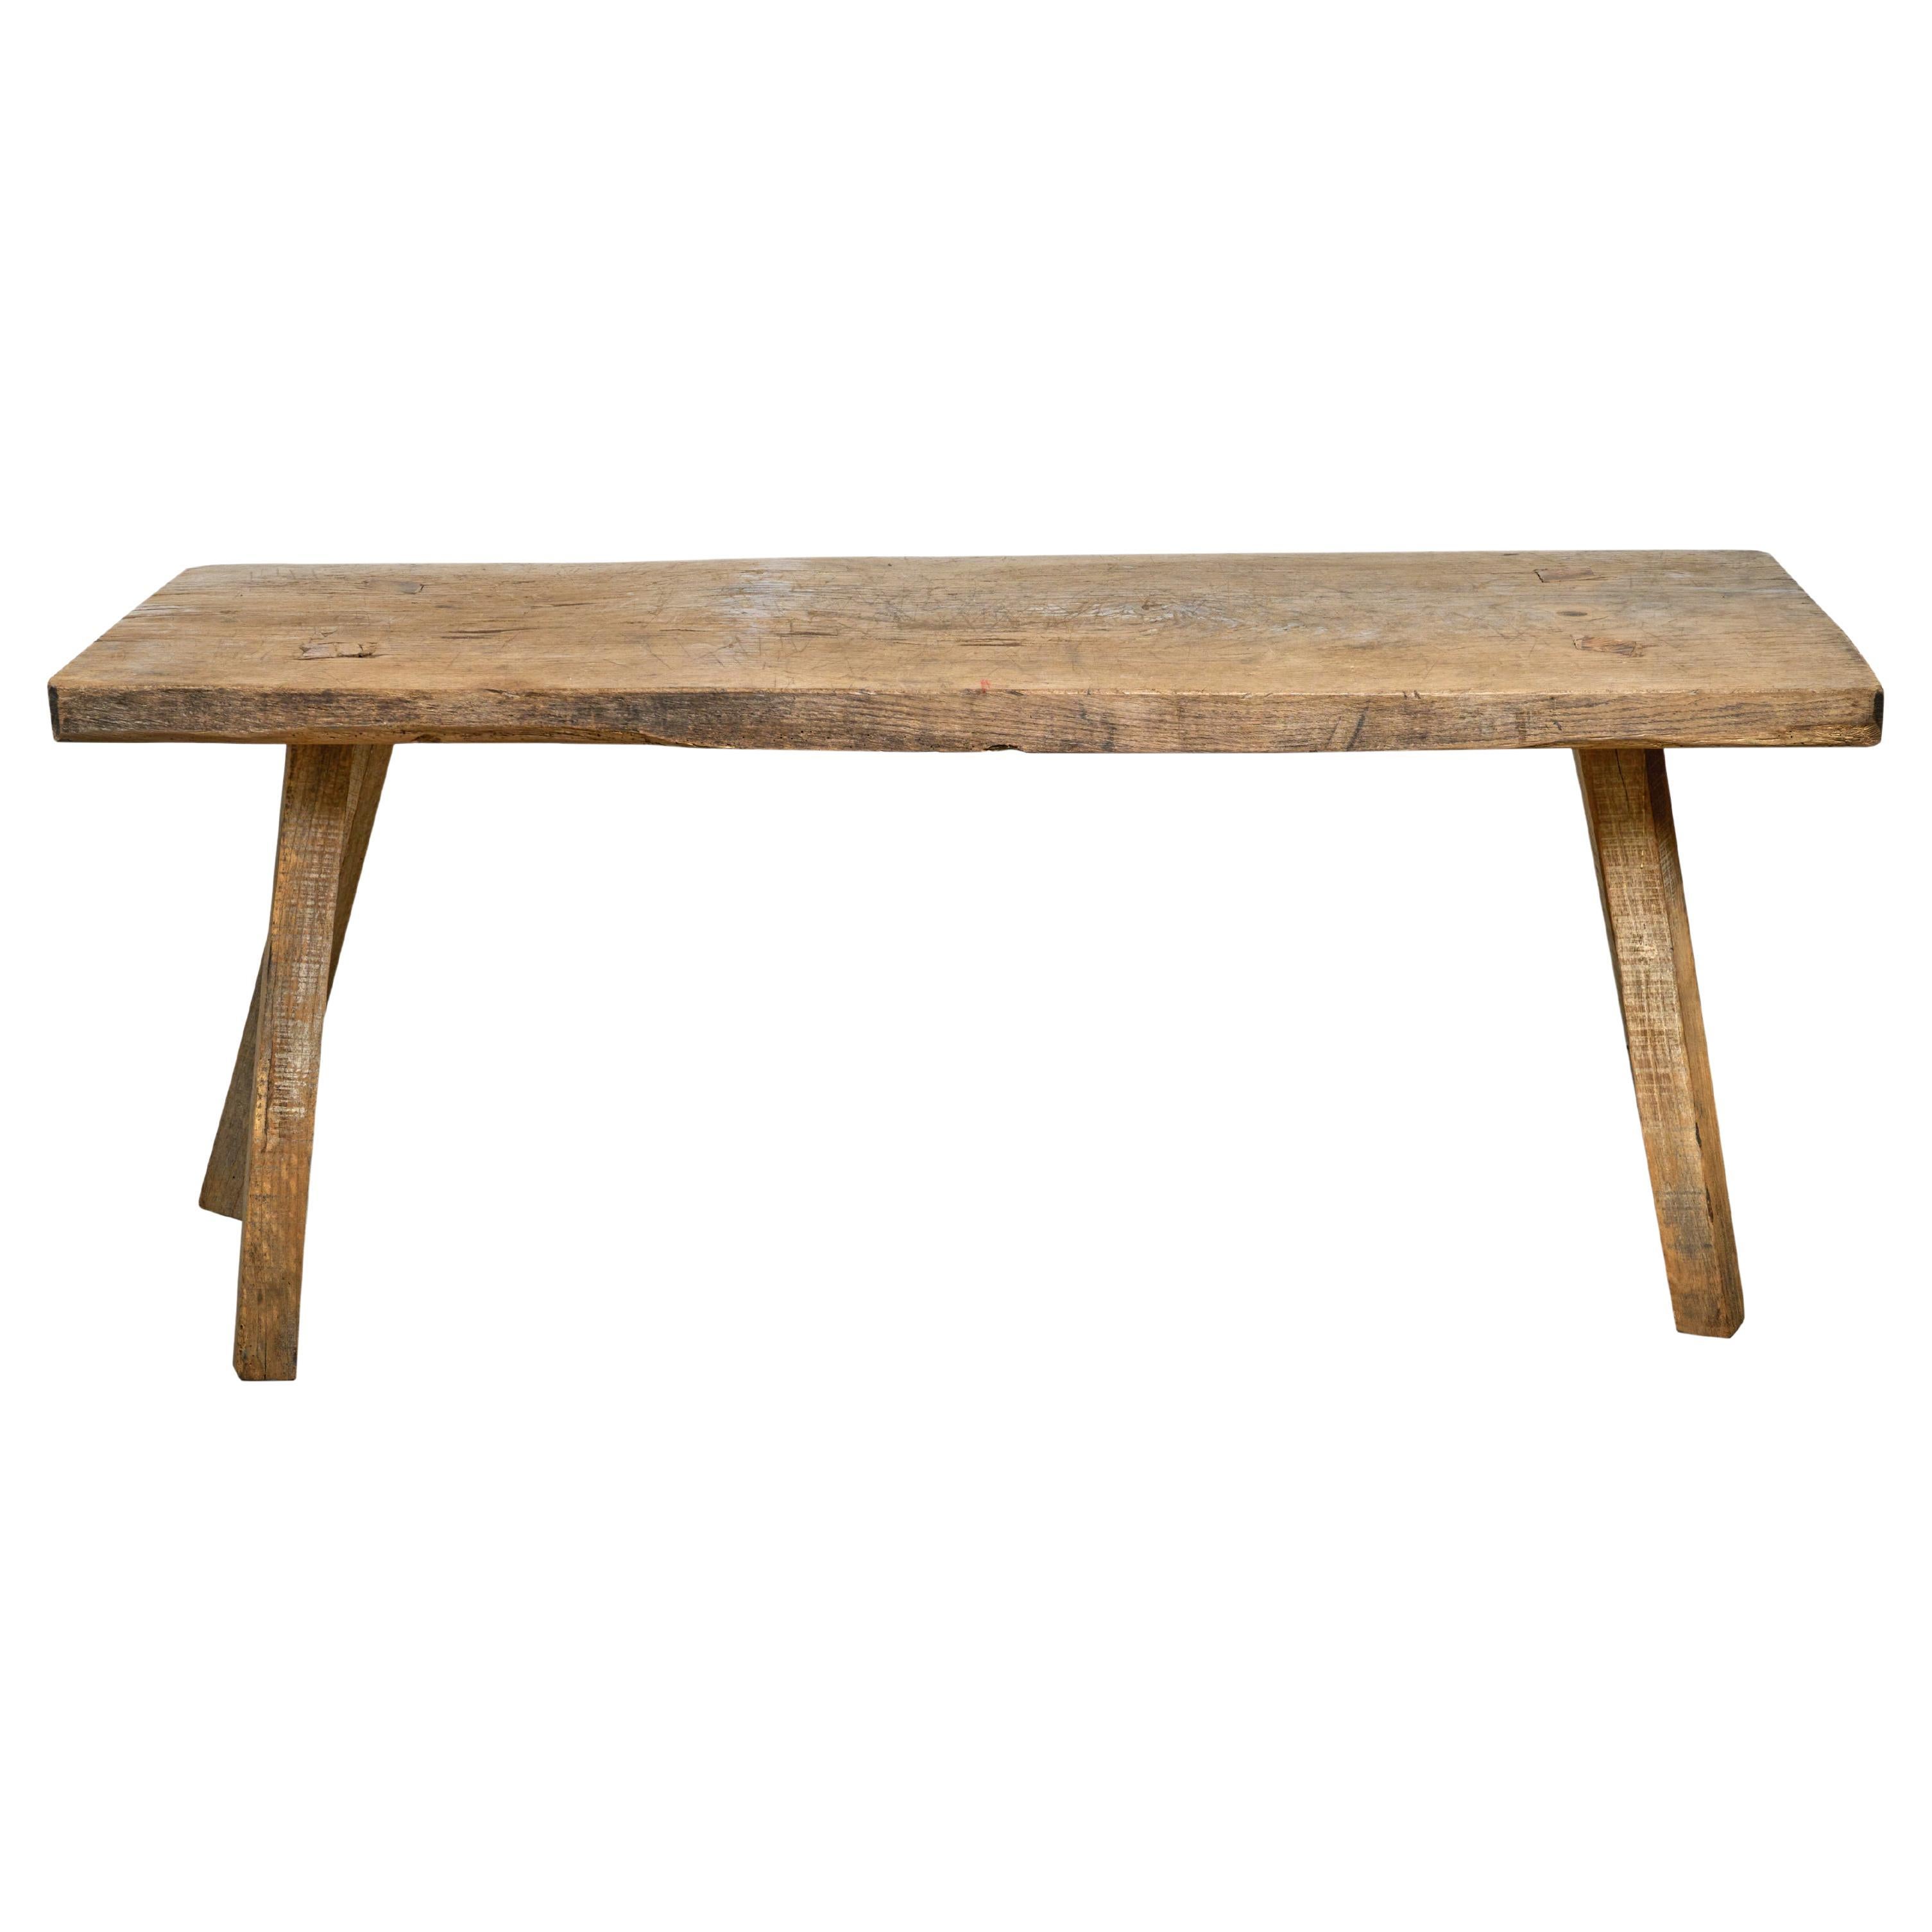 Primitive four leg table/chopping block. Great construction and form. 